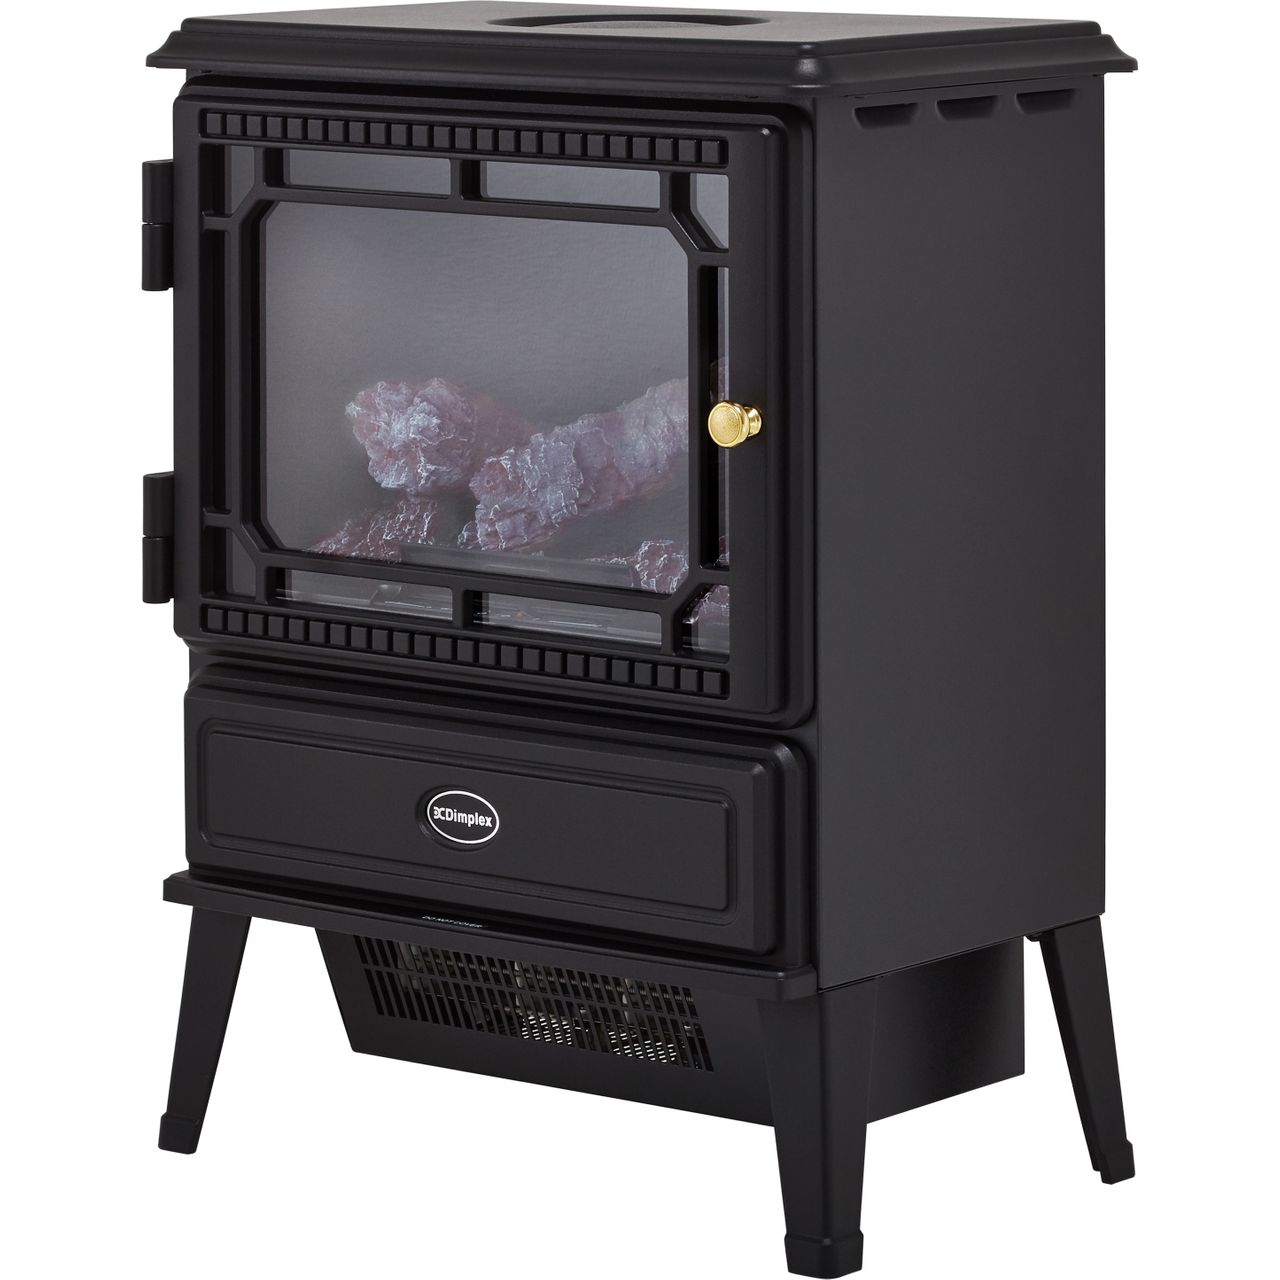 Dimplex Gosford GOS20 Log Effect Electric Stove With Remote Control Review